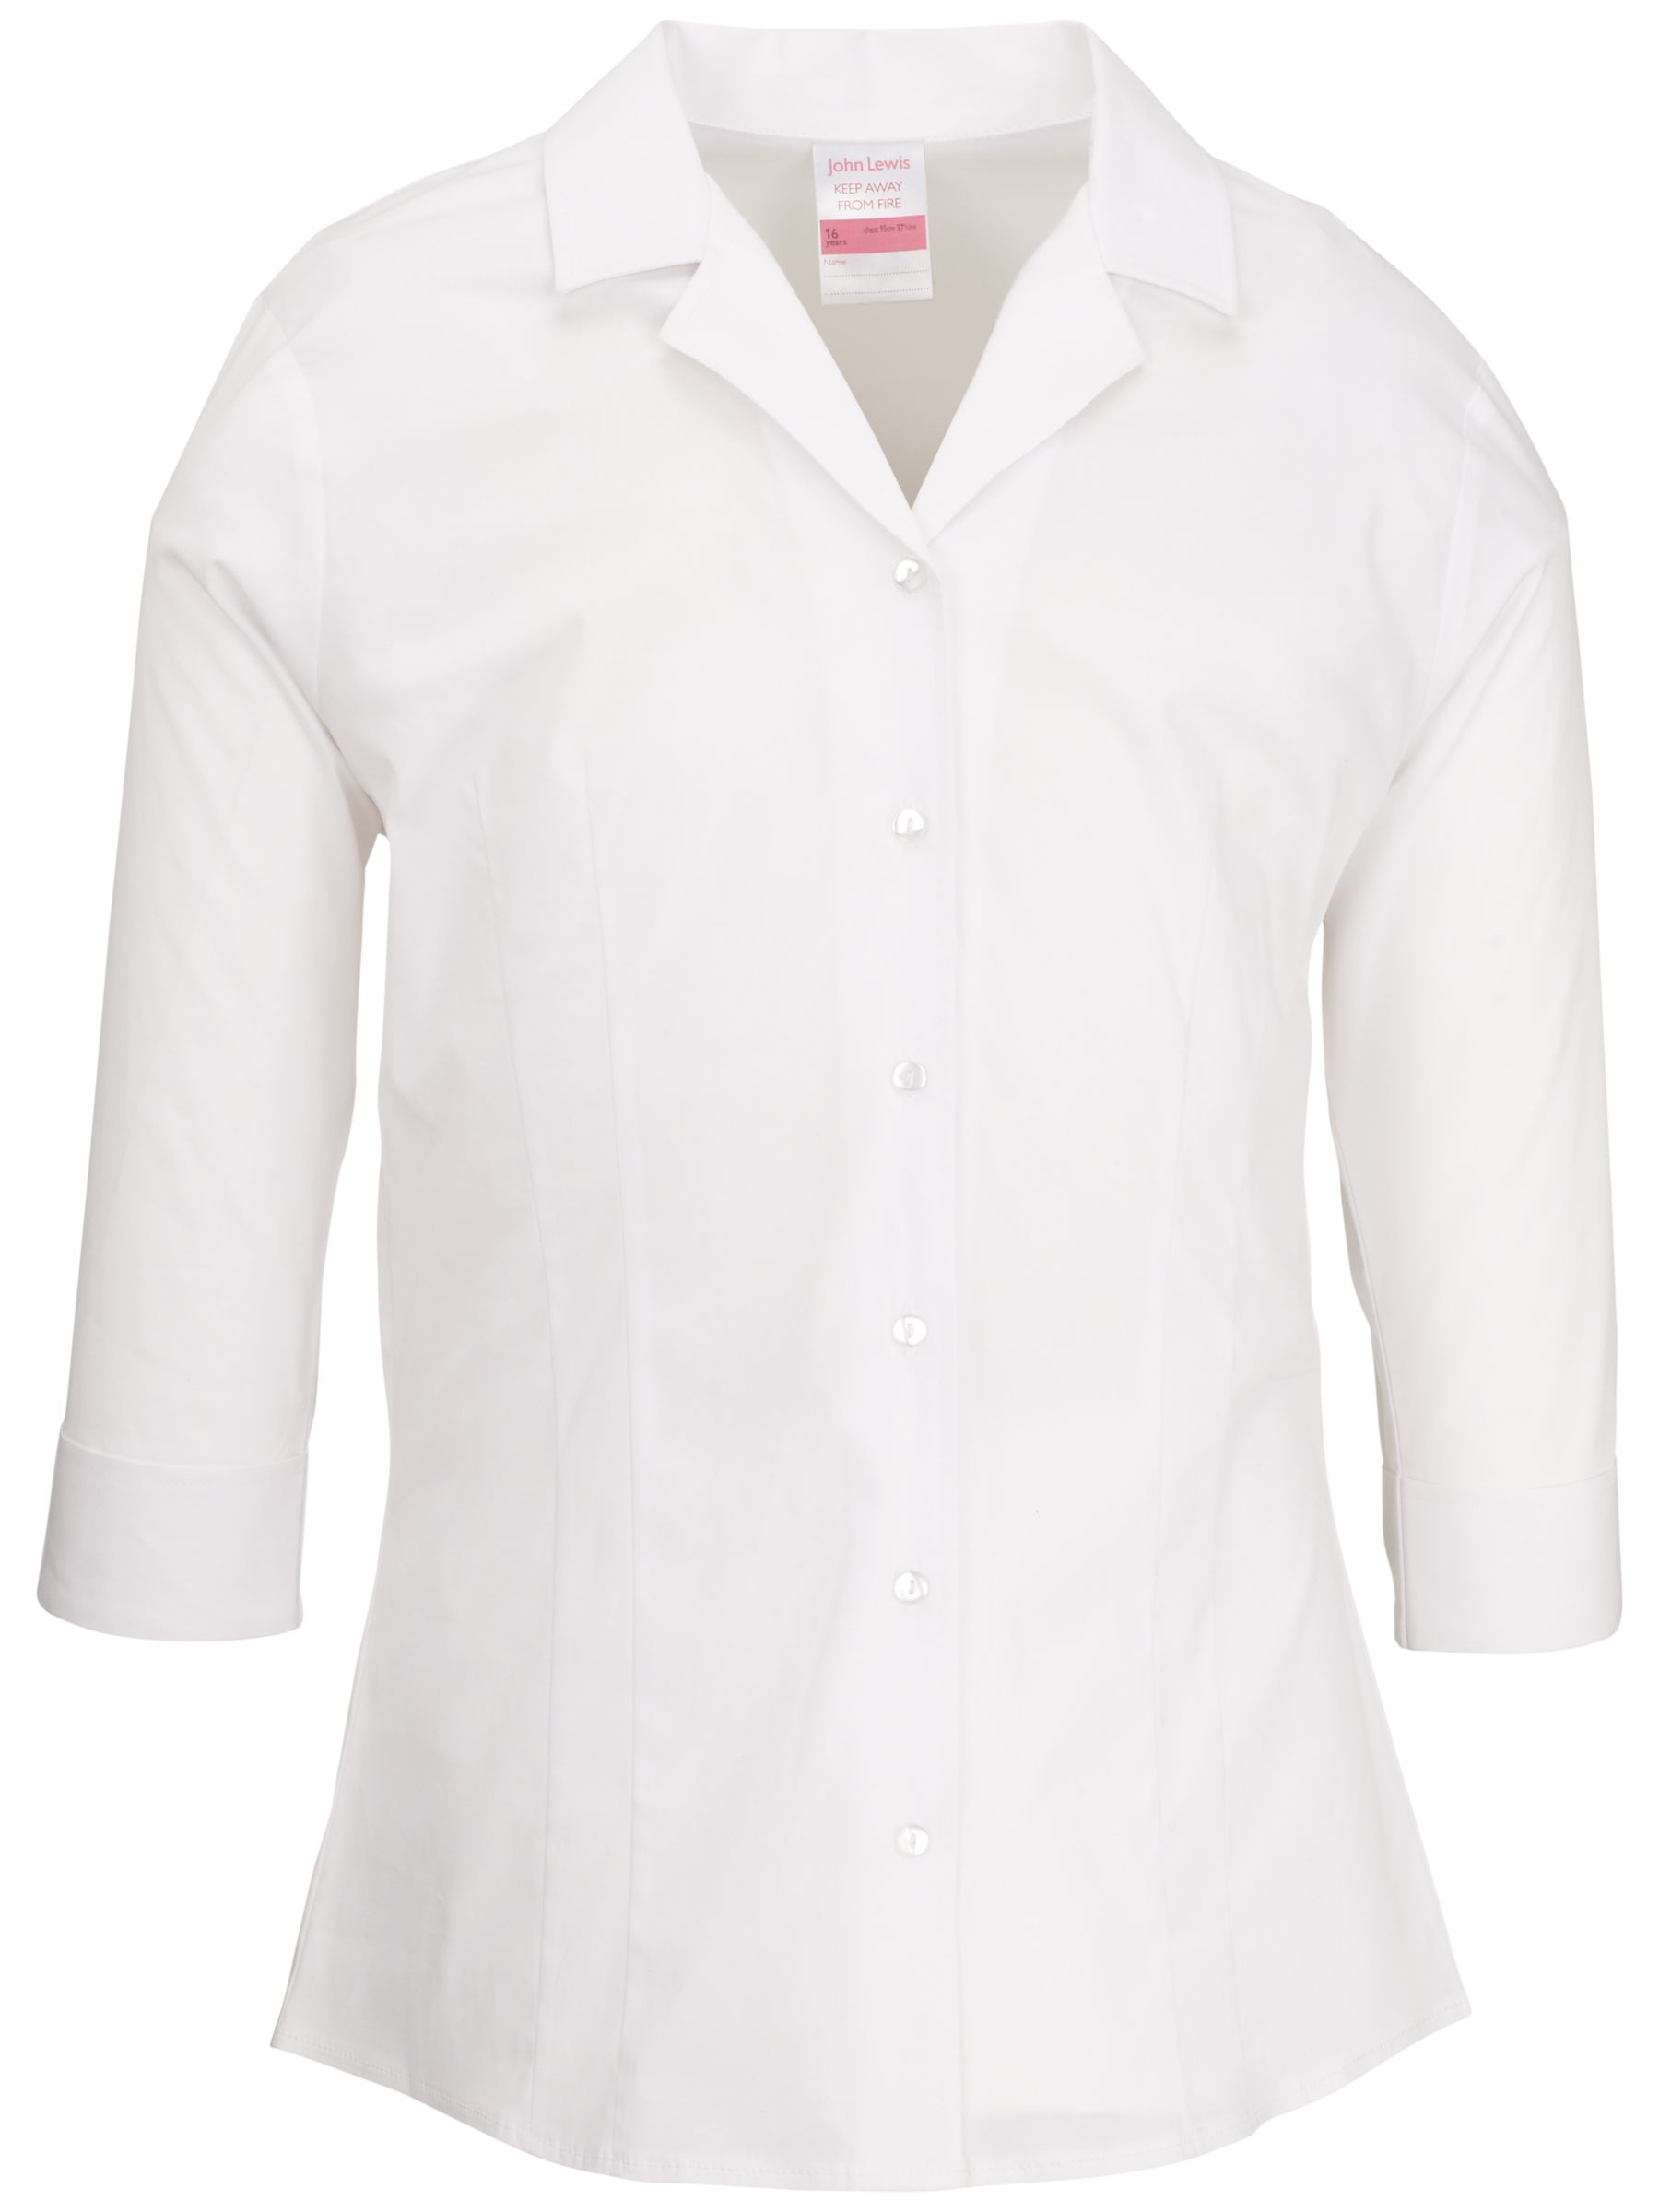 John Lewis Fitted Cotton Stretch Blouse, size: